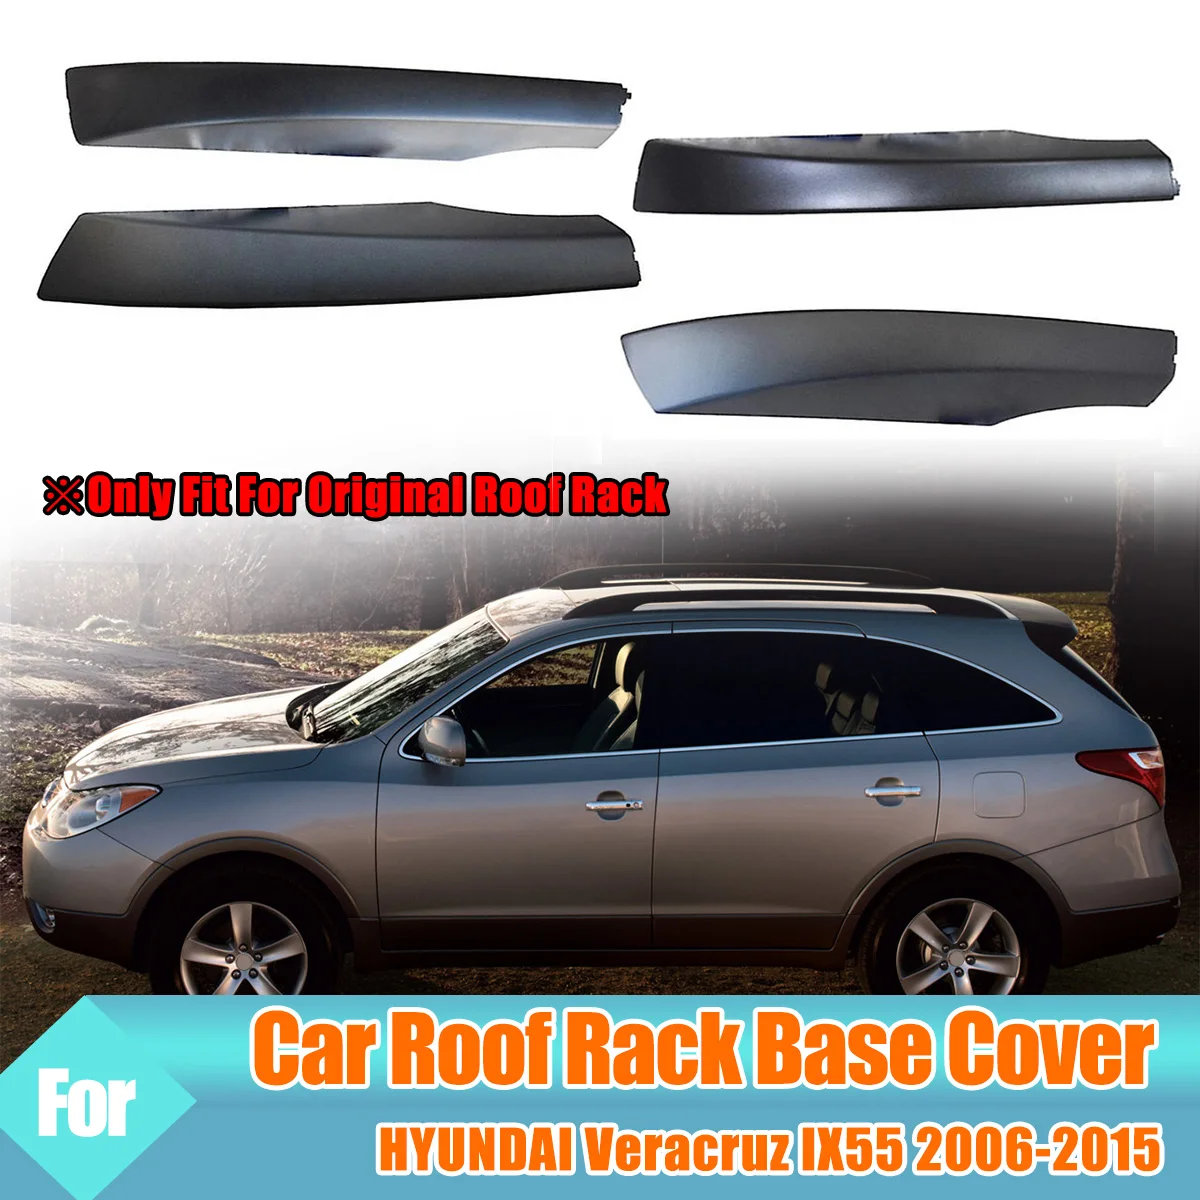 

Roof Rack Cover For HYUNDAI Veracruz IX55 2006-2015 Front Rear LH RH Roof Luggage Bar Rail End Shell Plasitc Cover Replacement